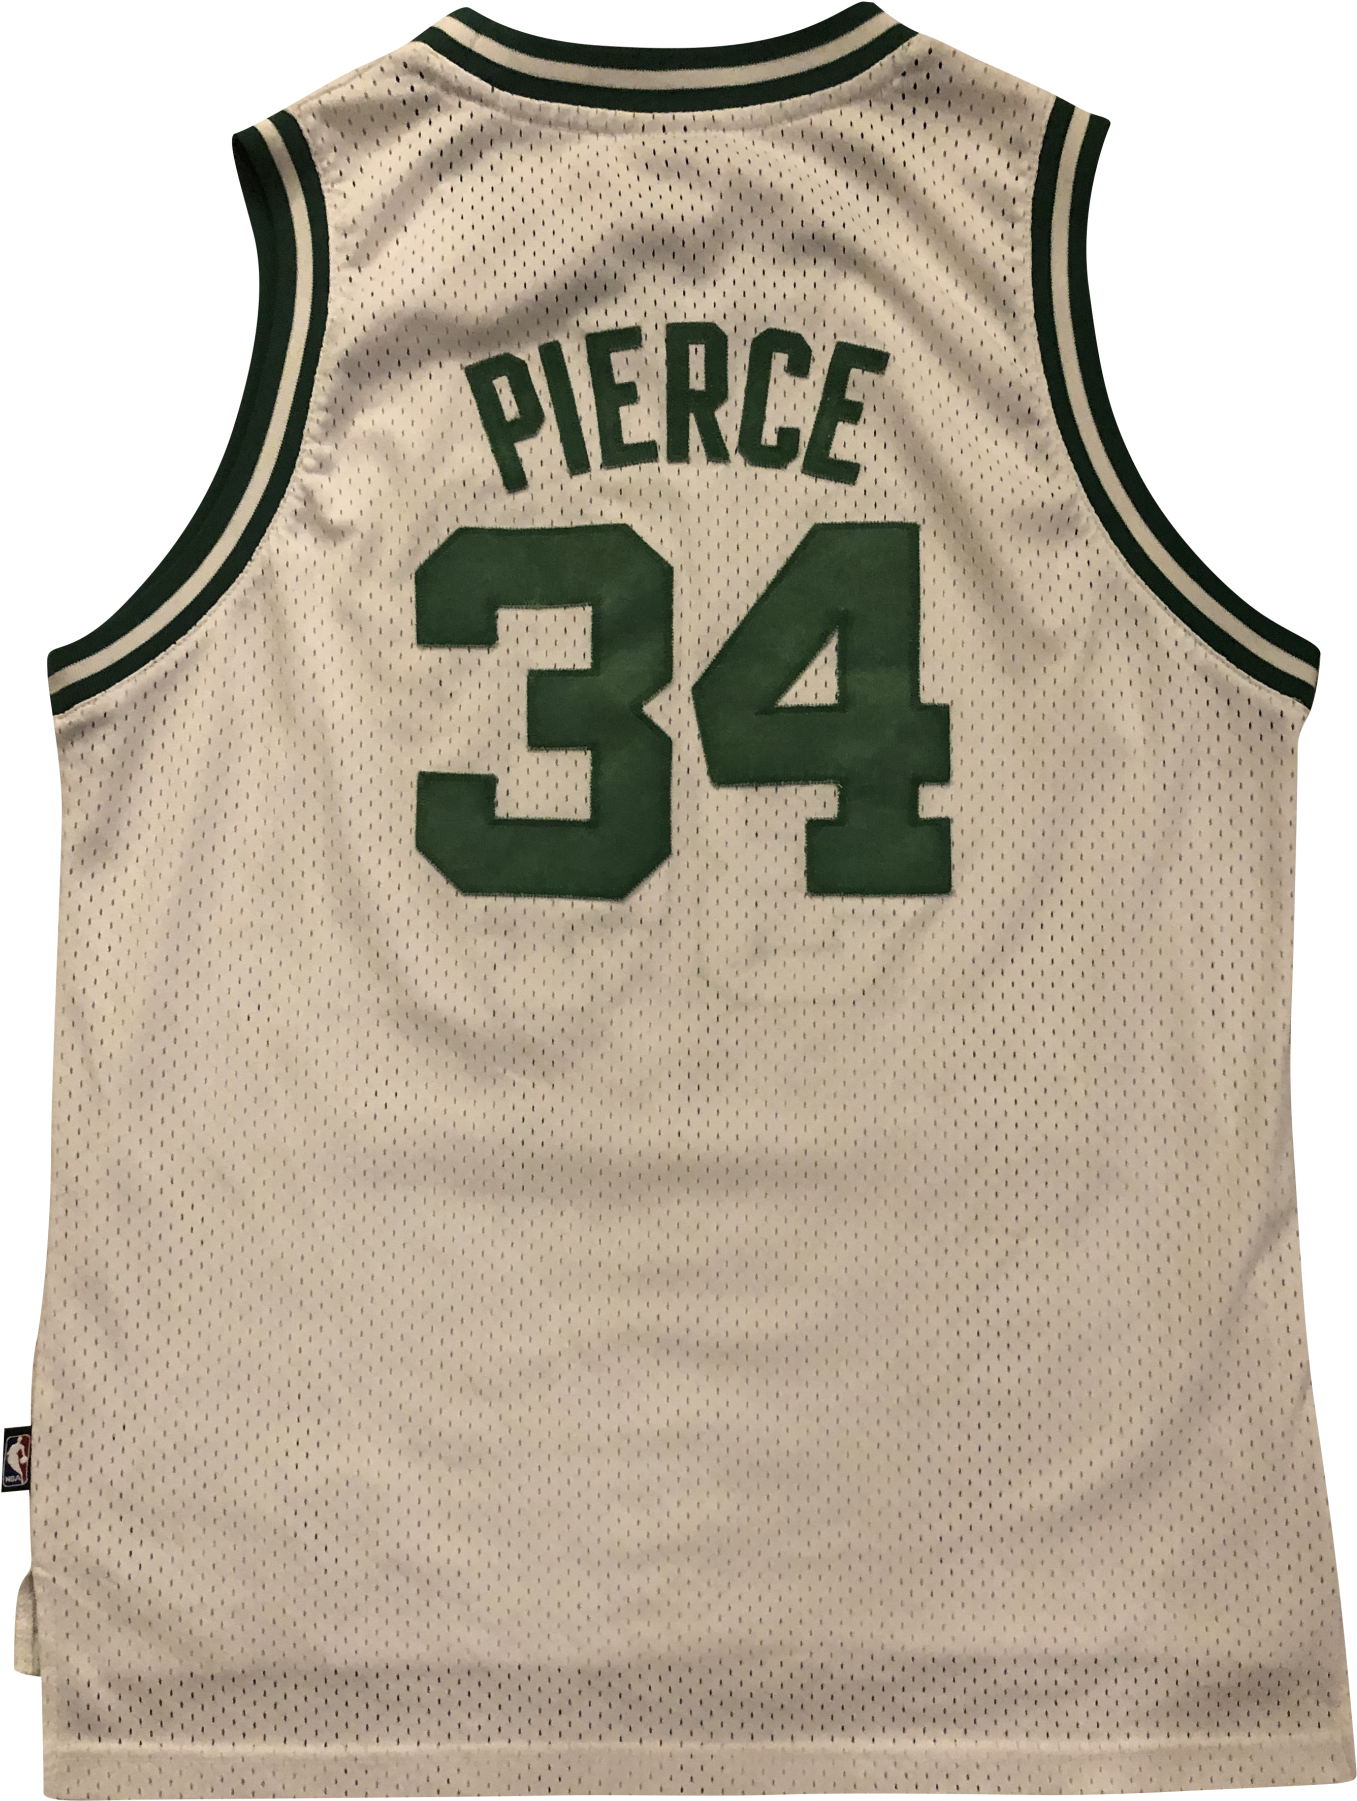 A White And Green Basketball Jersey With A Number And A Black Background